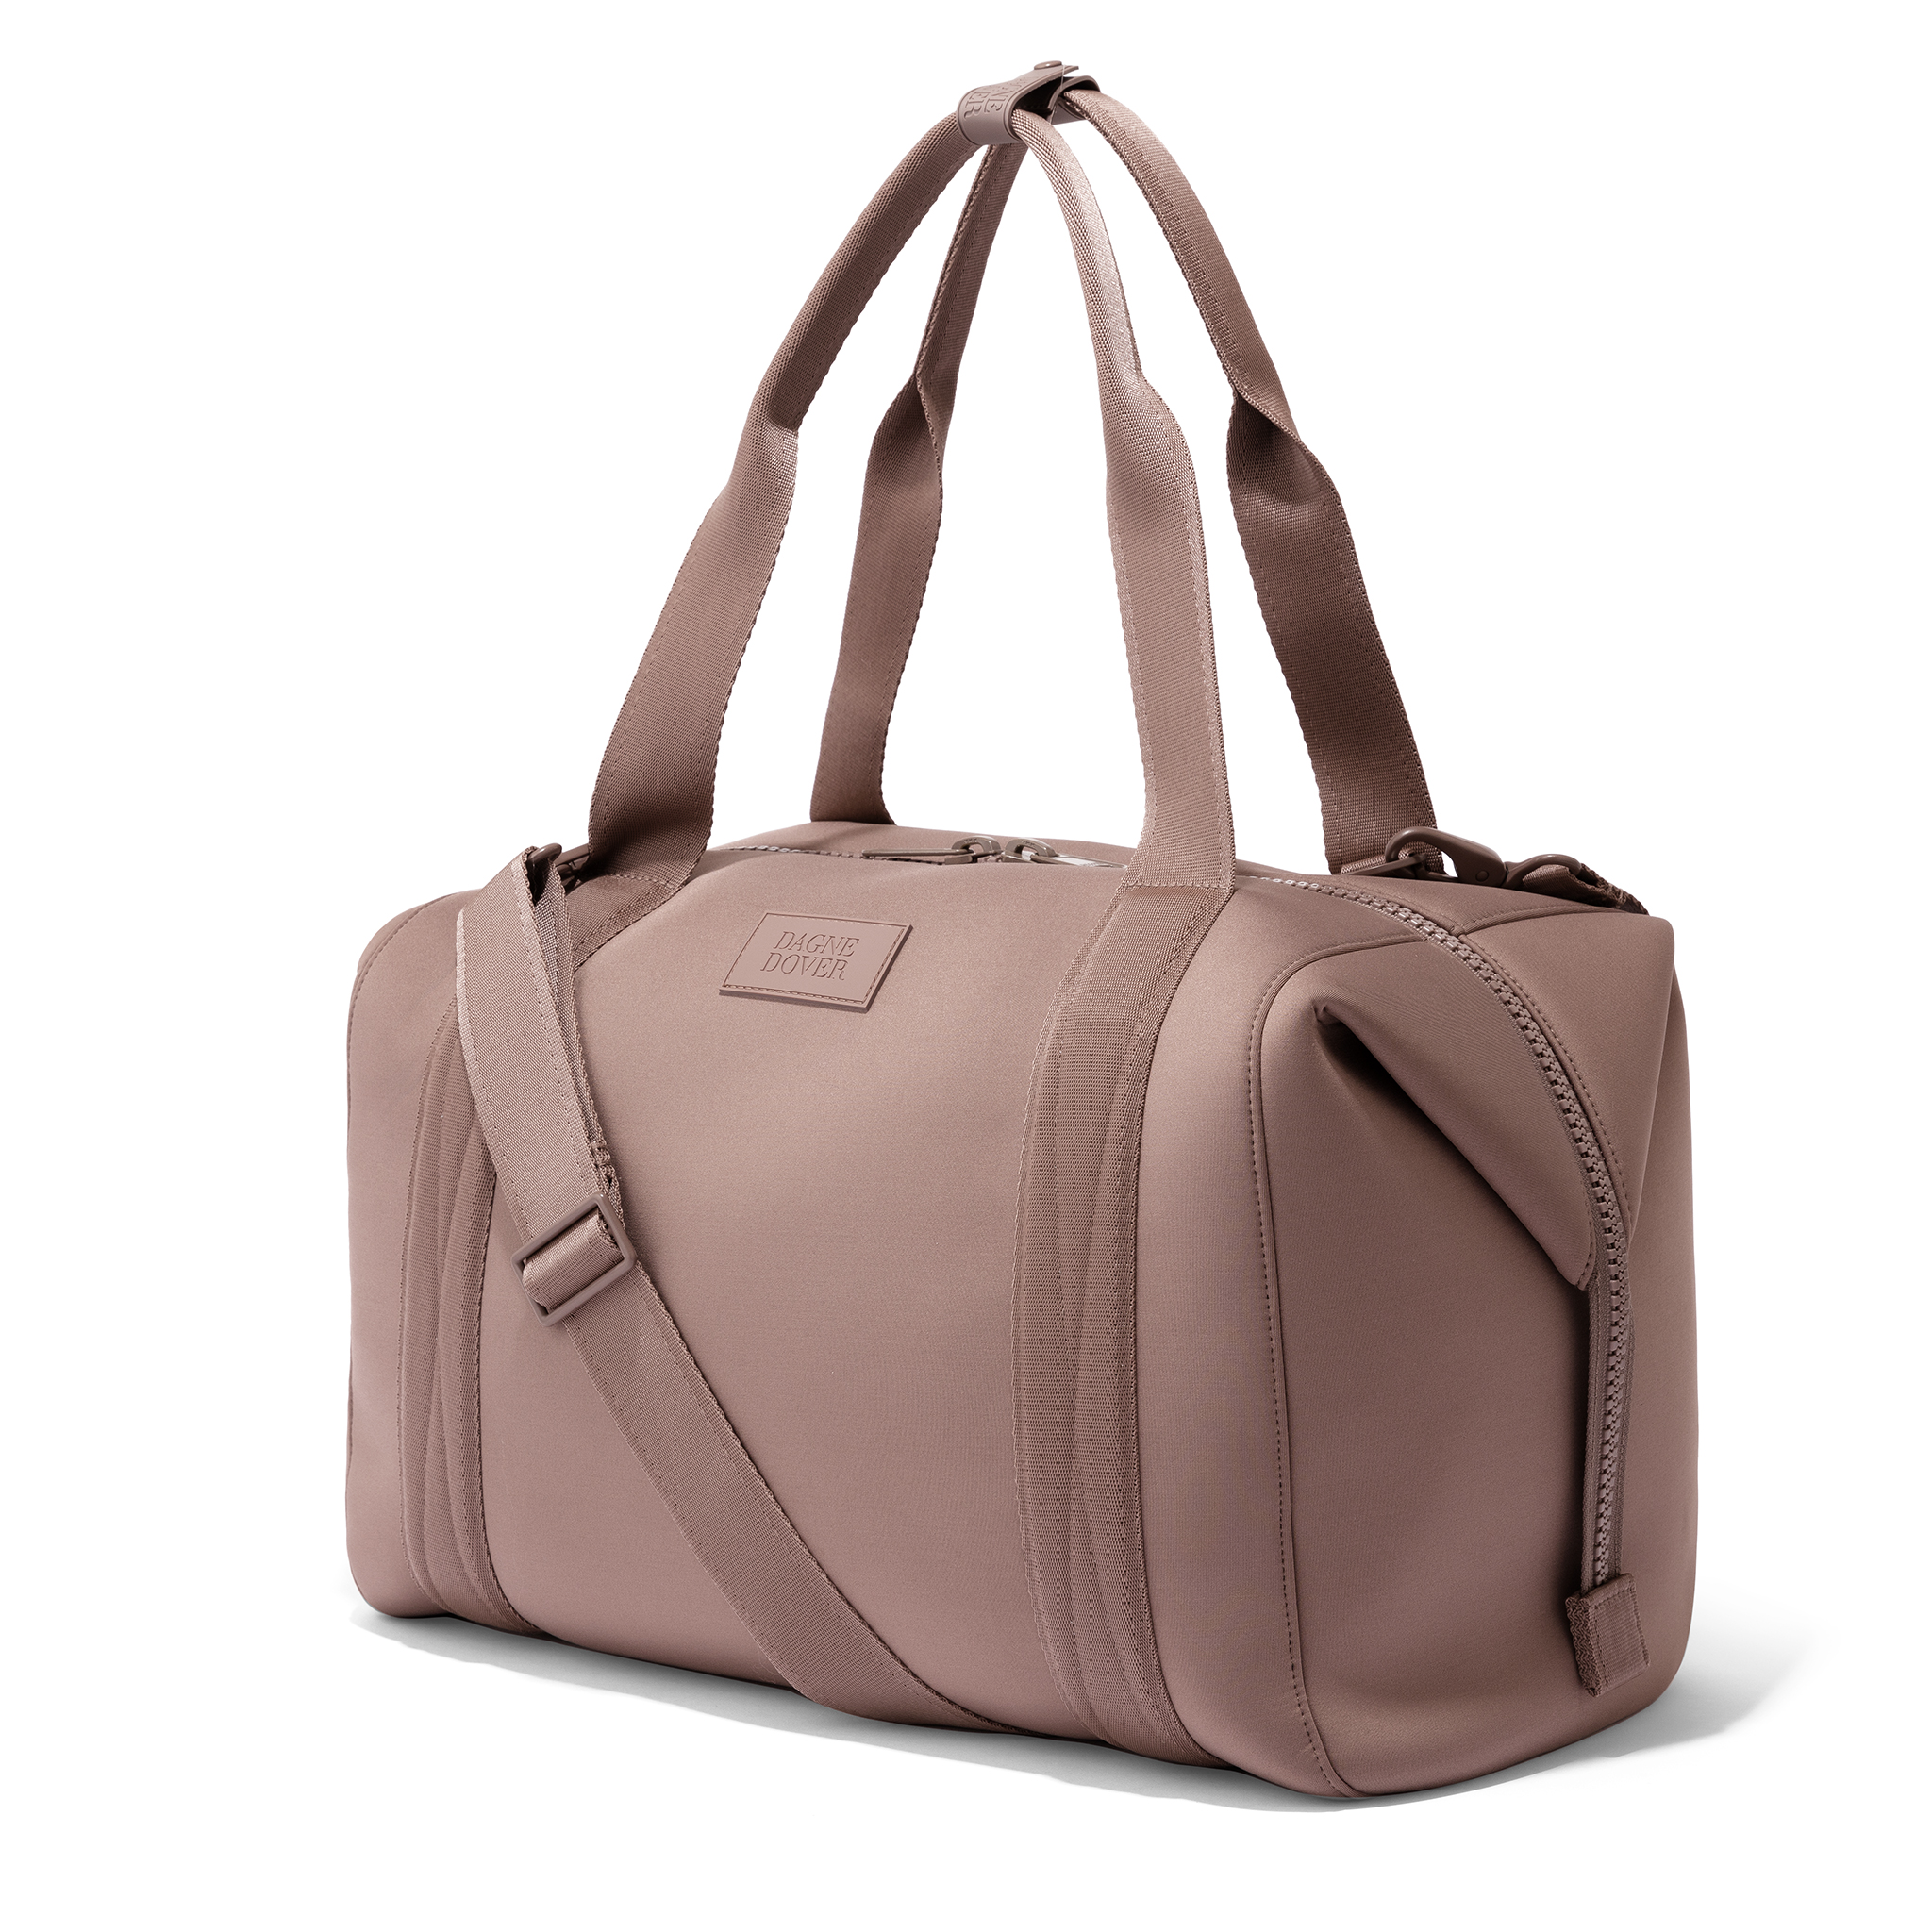 Why I Love Dagne Dover - An Honest Review of My Landon Carryall